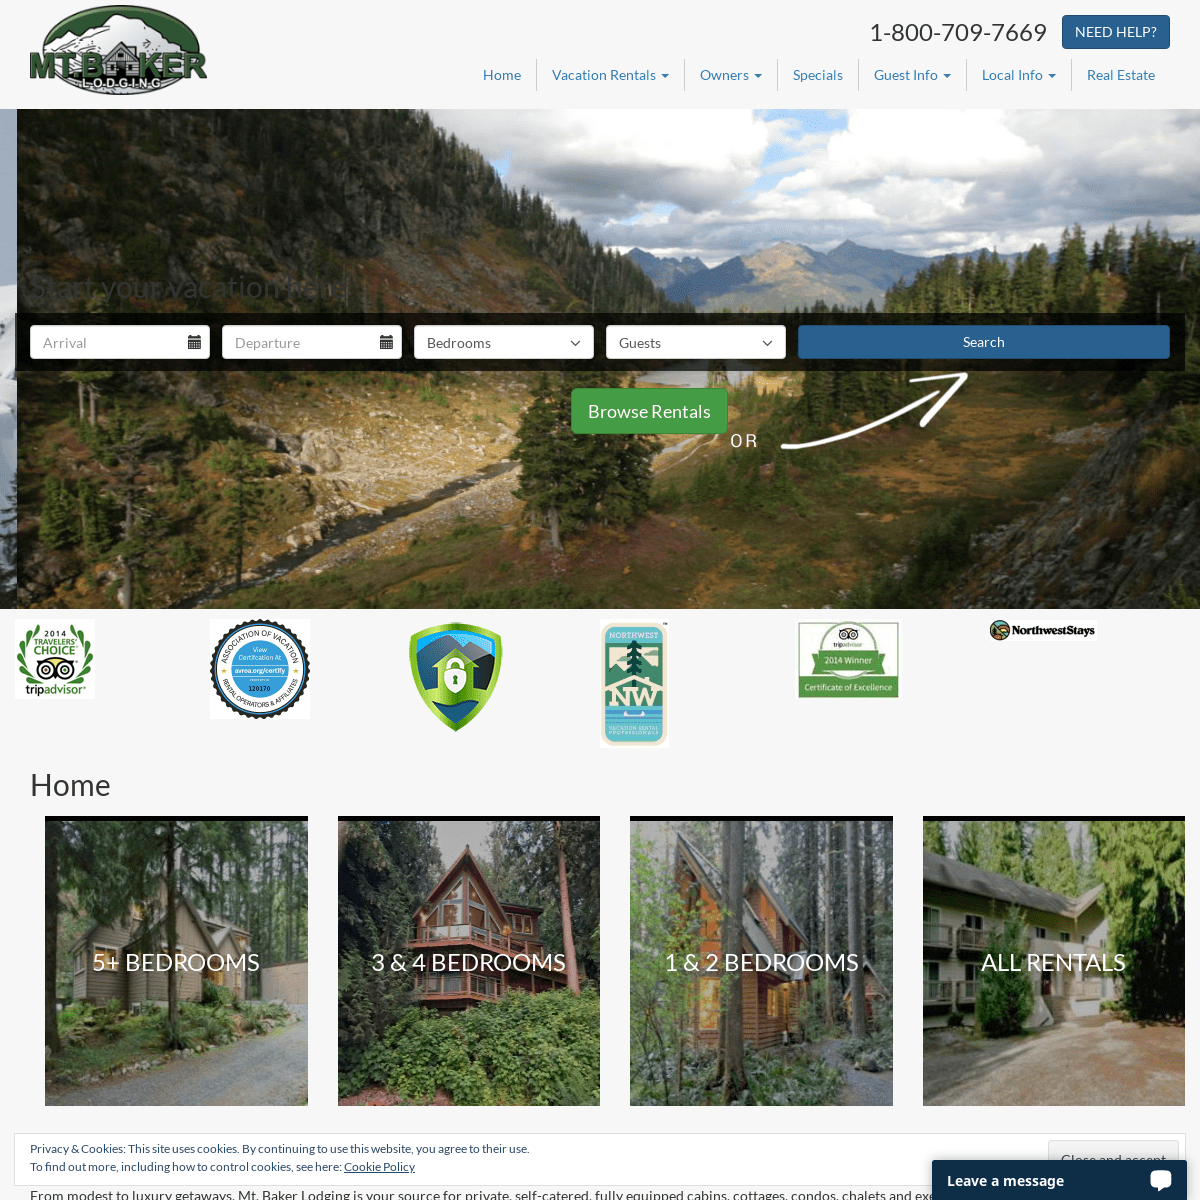 A complete backup of mtbakerlodging.com